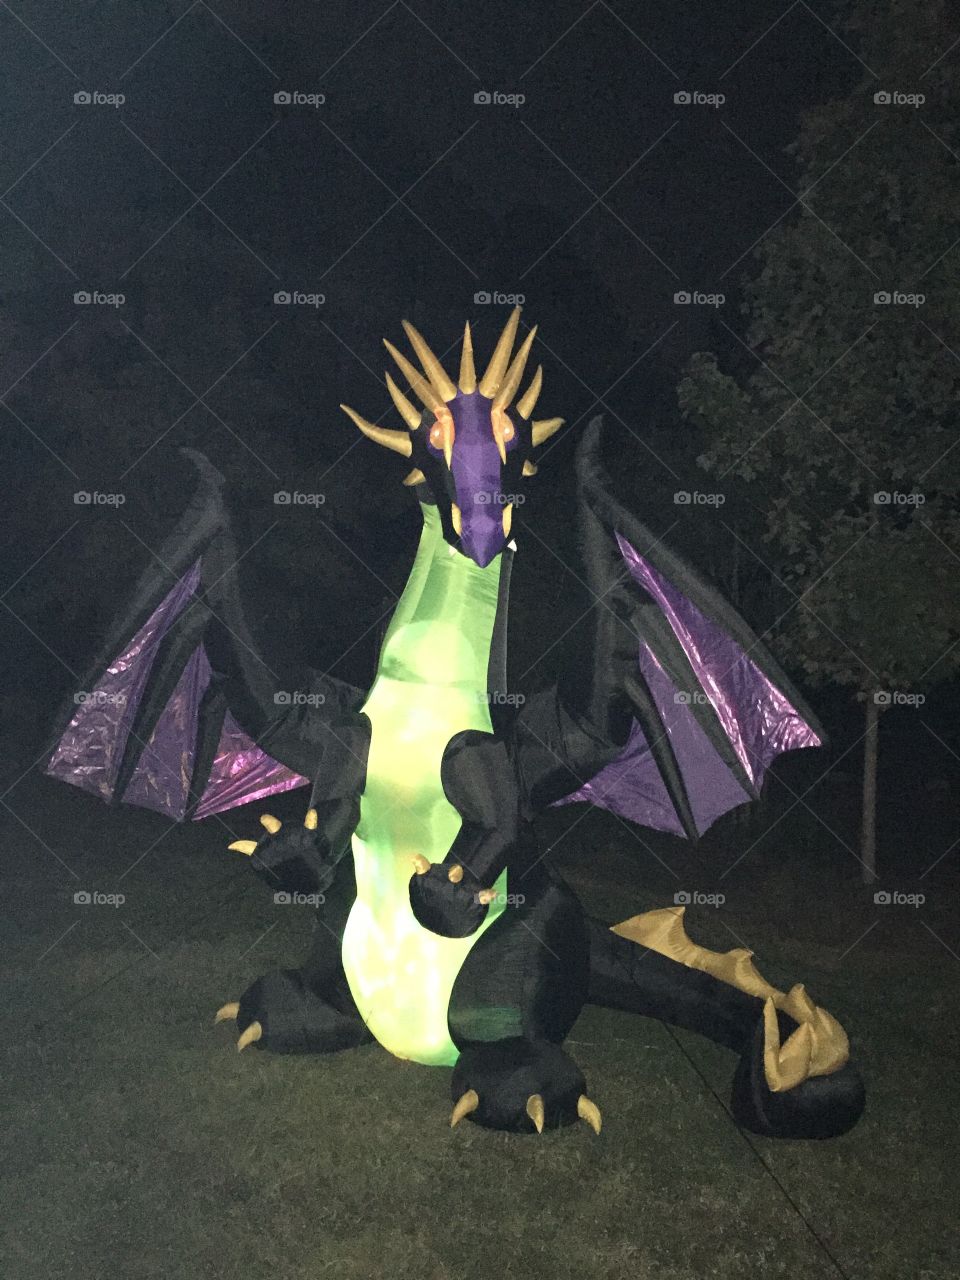 Oh no Dragons are invading!. Nationwide Insurance in my town thought it would be great decoration for their lawn at night for Halloween. 